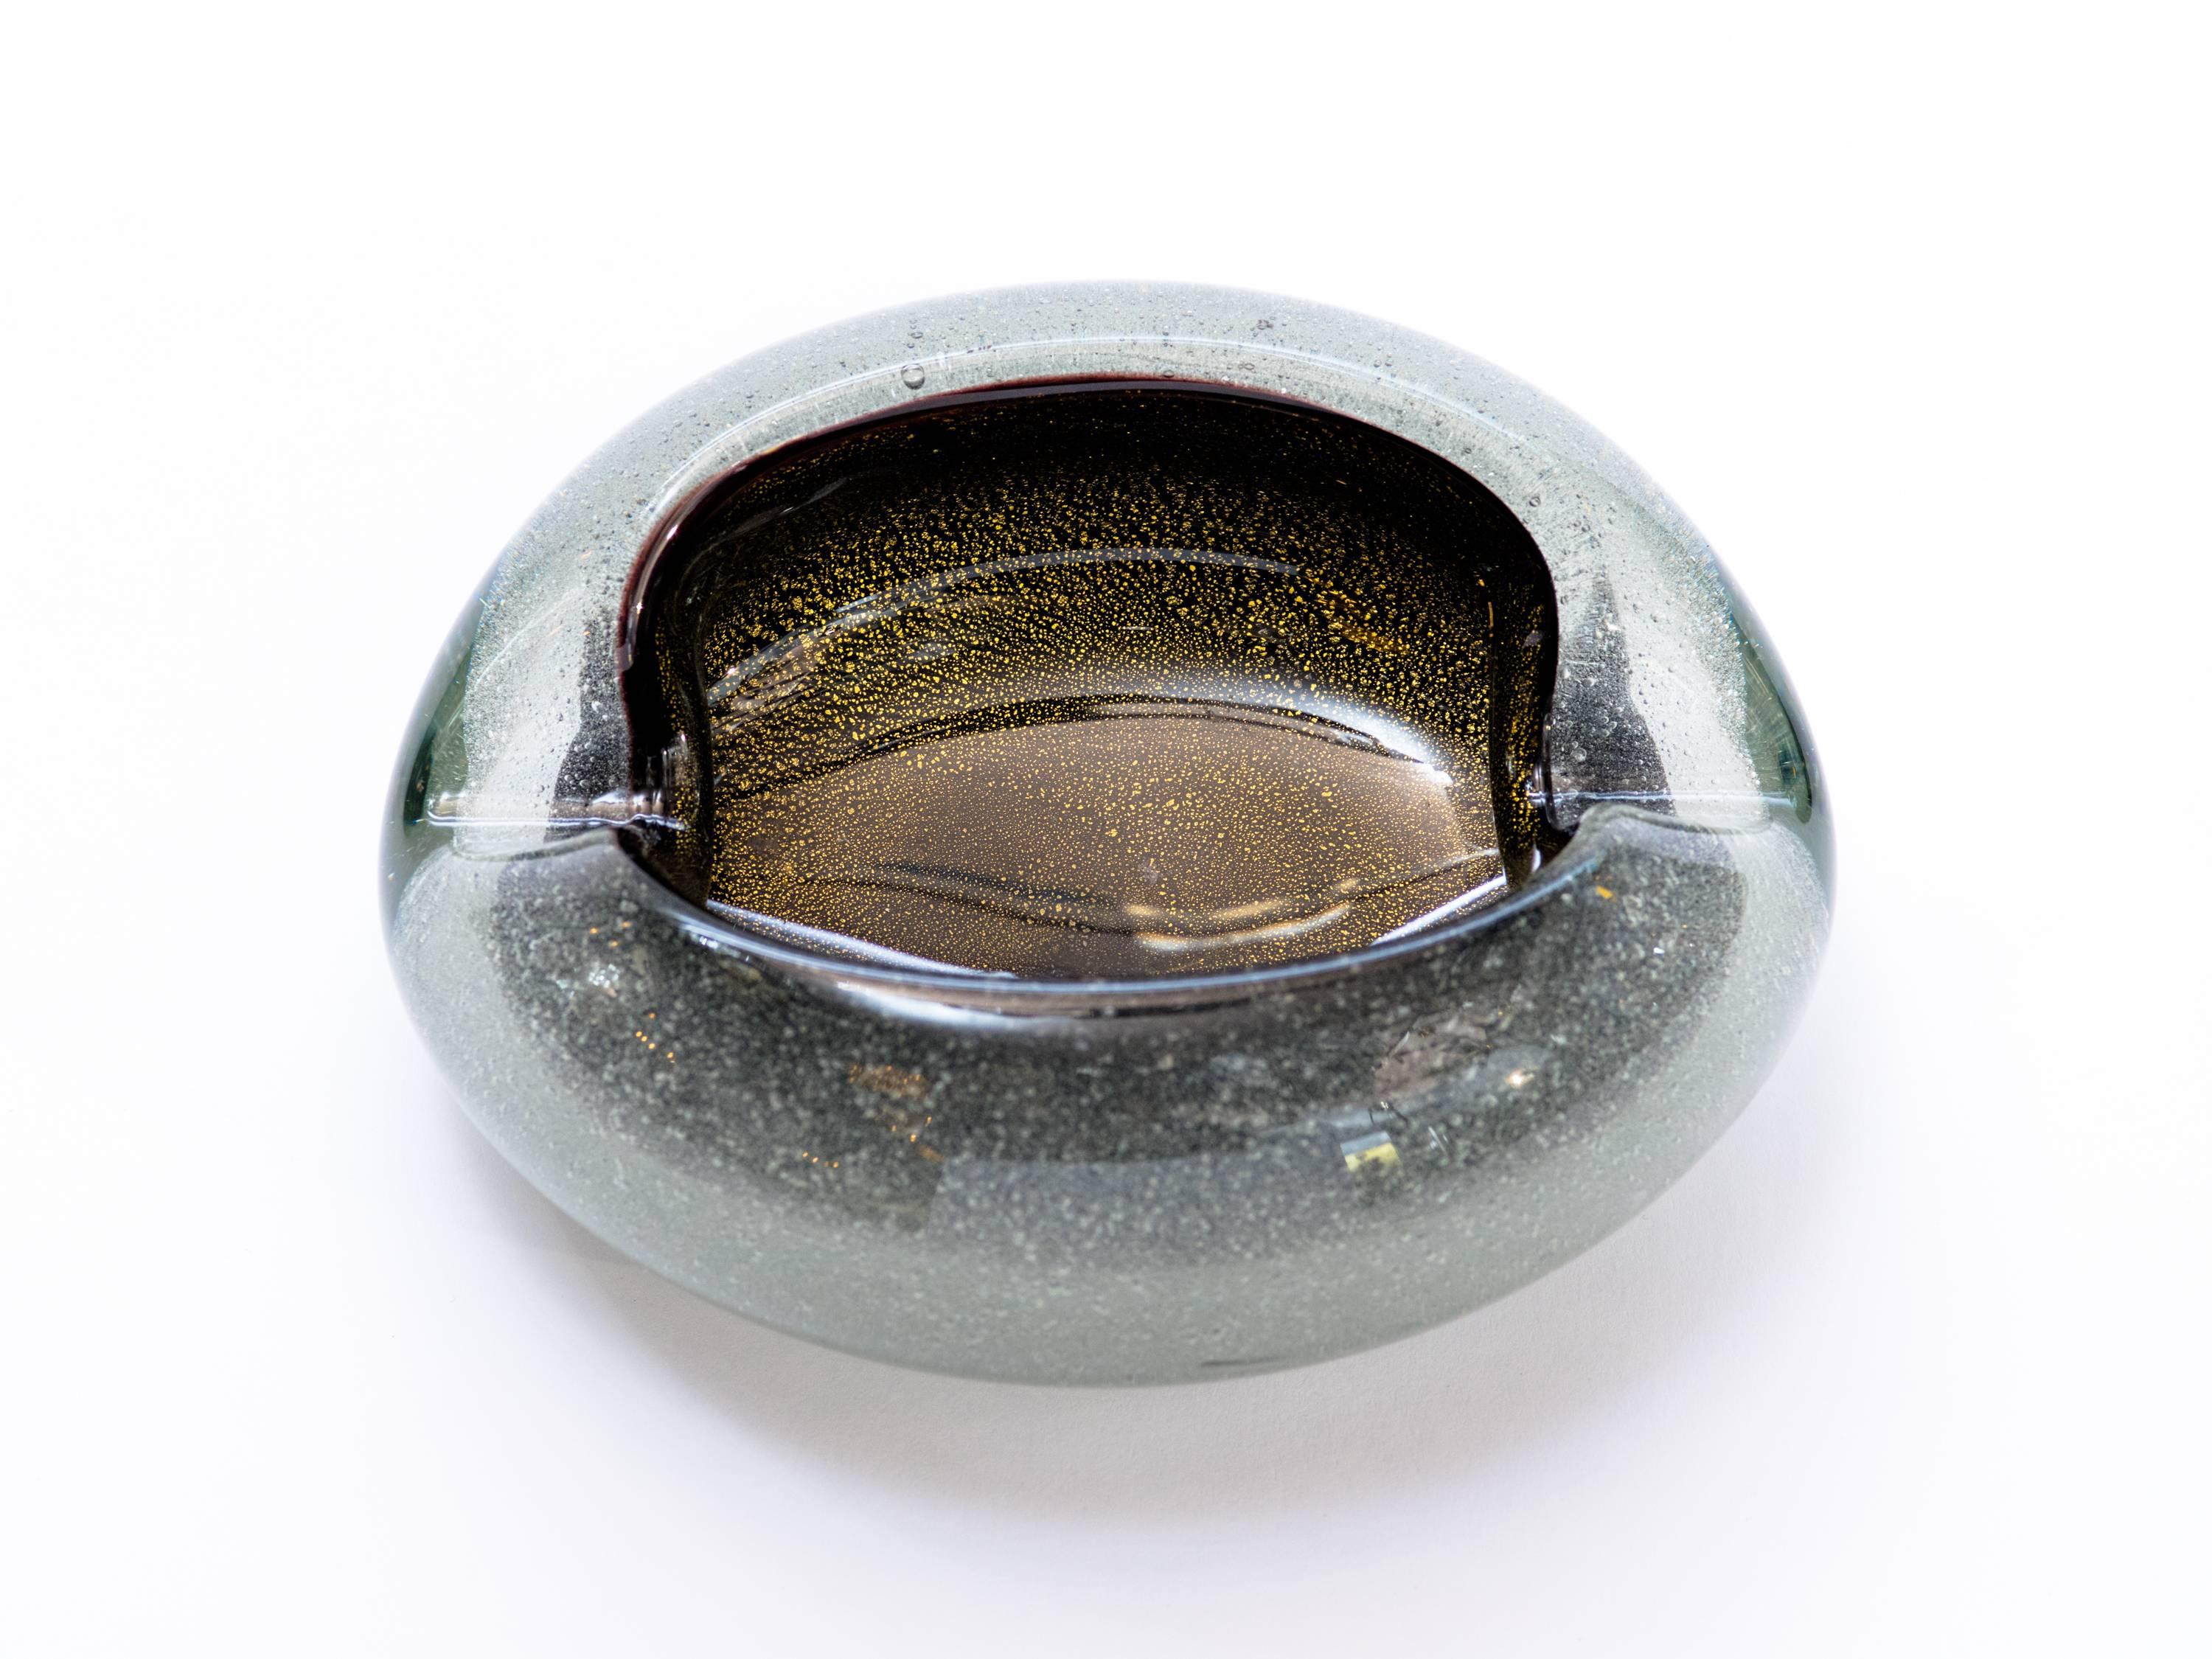 Stunning mid-century modern ashtray or bowl, comprised of handblown Murano glass. The ashtray has black glass interior with gold flecks details, and features gradient smokey grey exterior with iridescent speckles. The ashtray has an organic oval